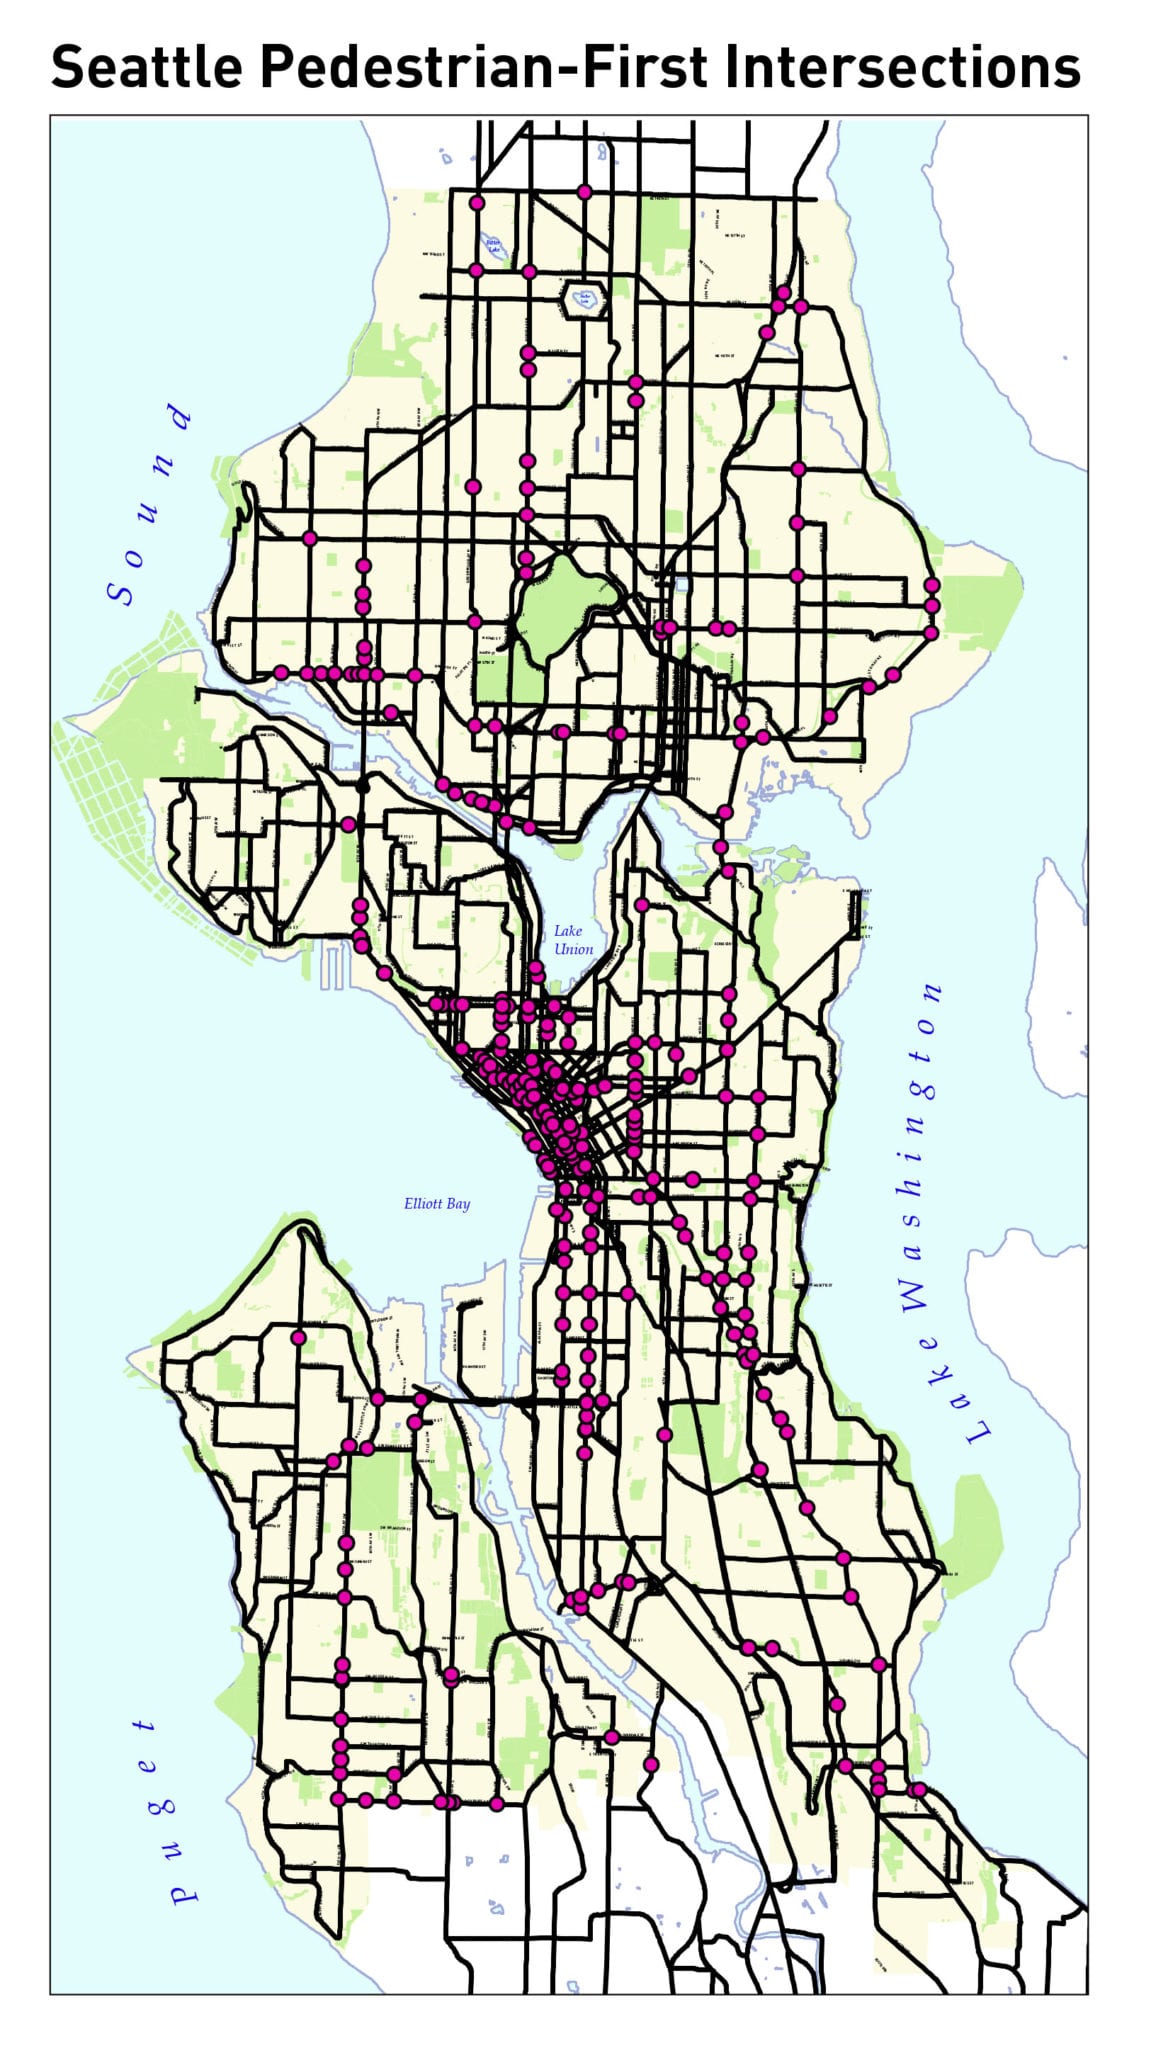 Map of Seattle Pedestrian-First Intersections